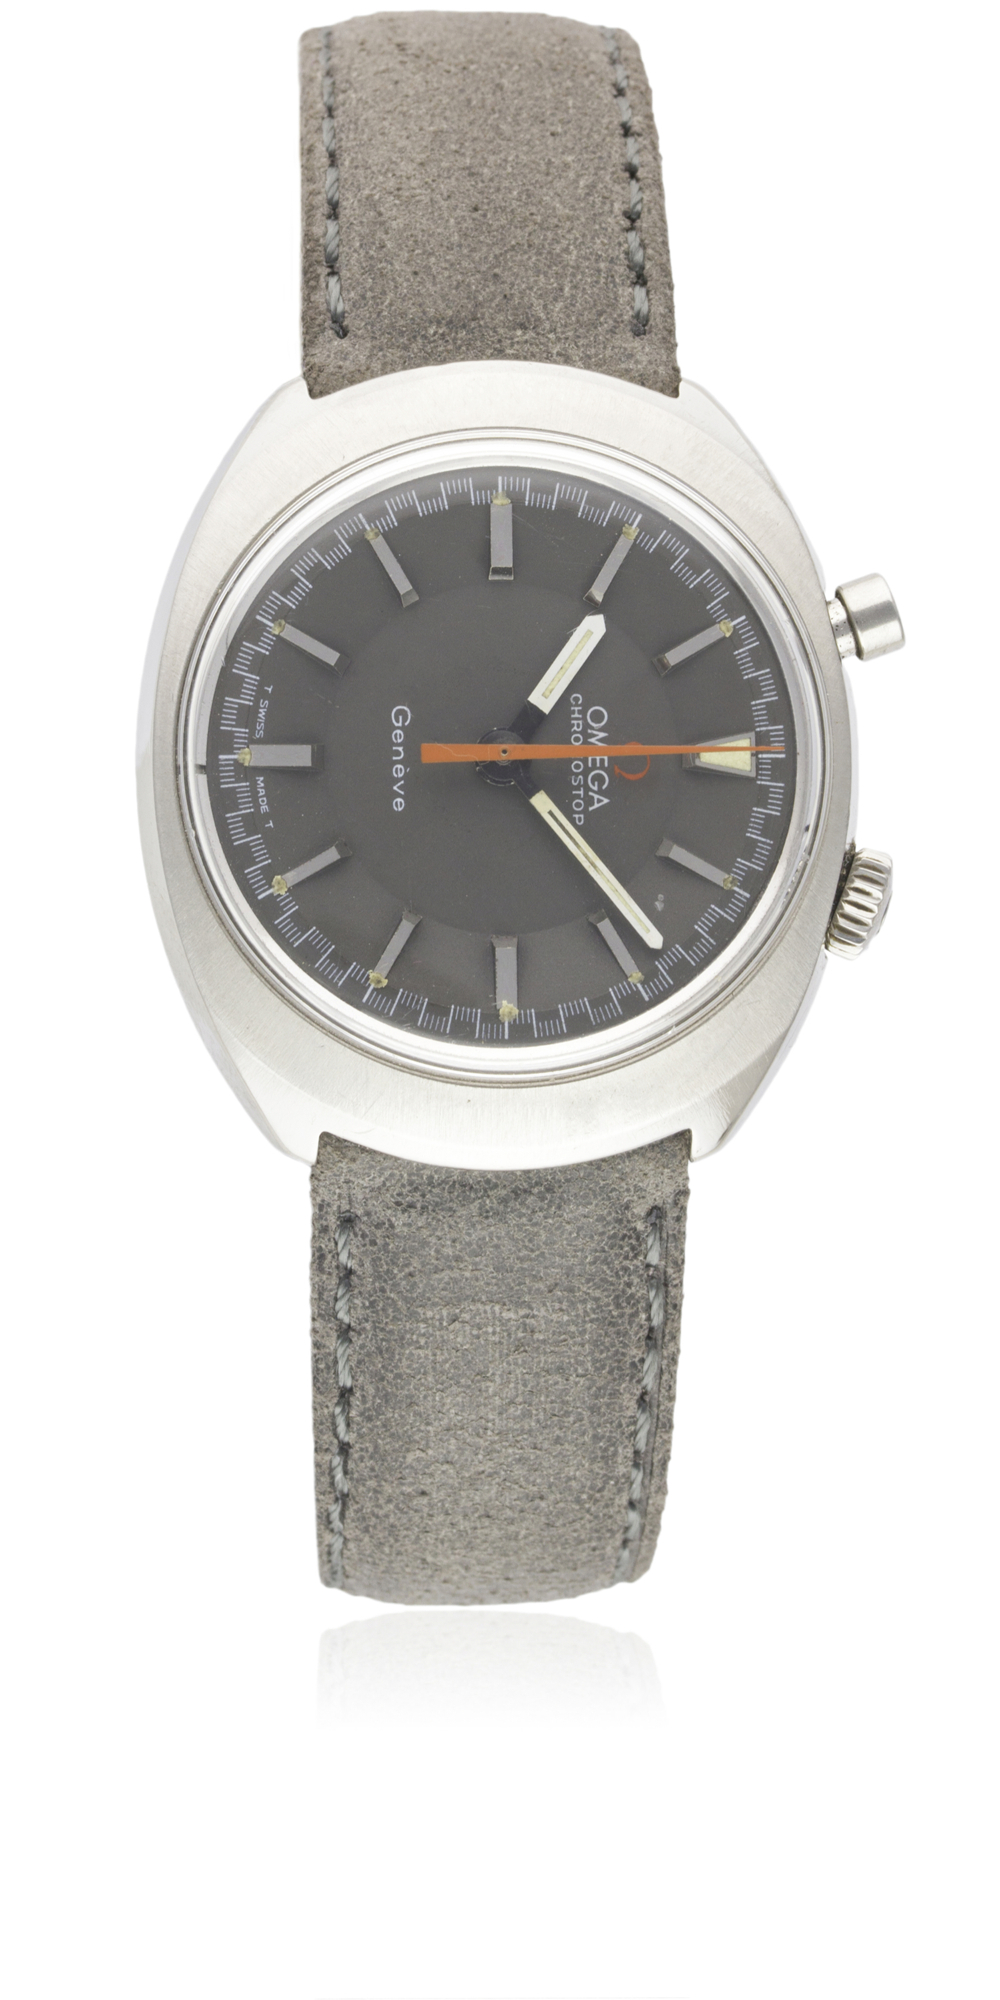 A GENTLEMAN'S STAINLESS STEEL OMEGA SEAMASTER CHRONOSTOP DRIVERS WRIST WATCH CIRCA 1967, REF. 145. - Image 2 of 2